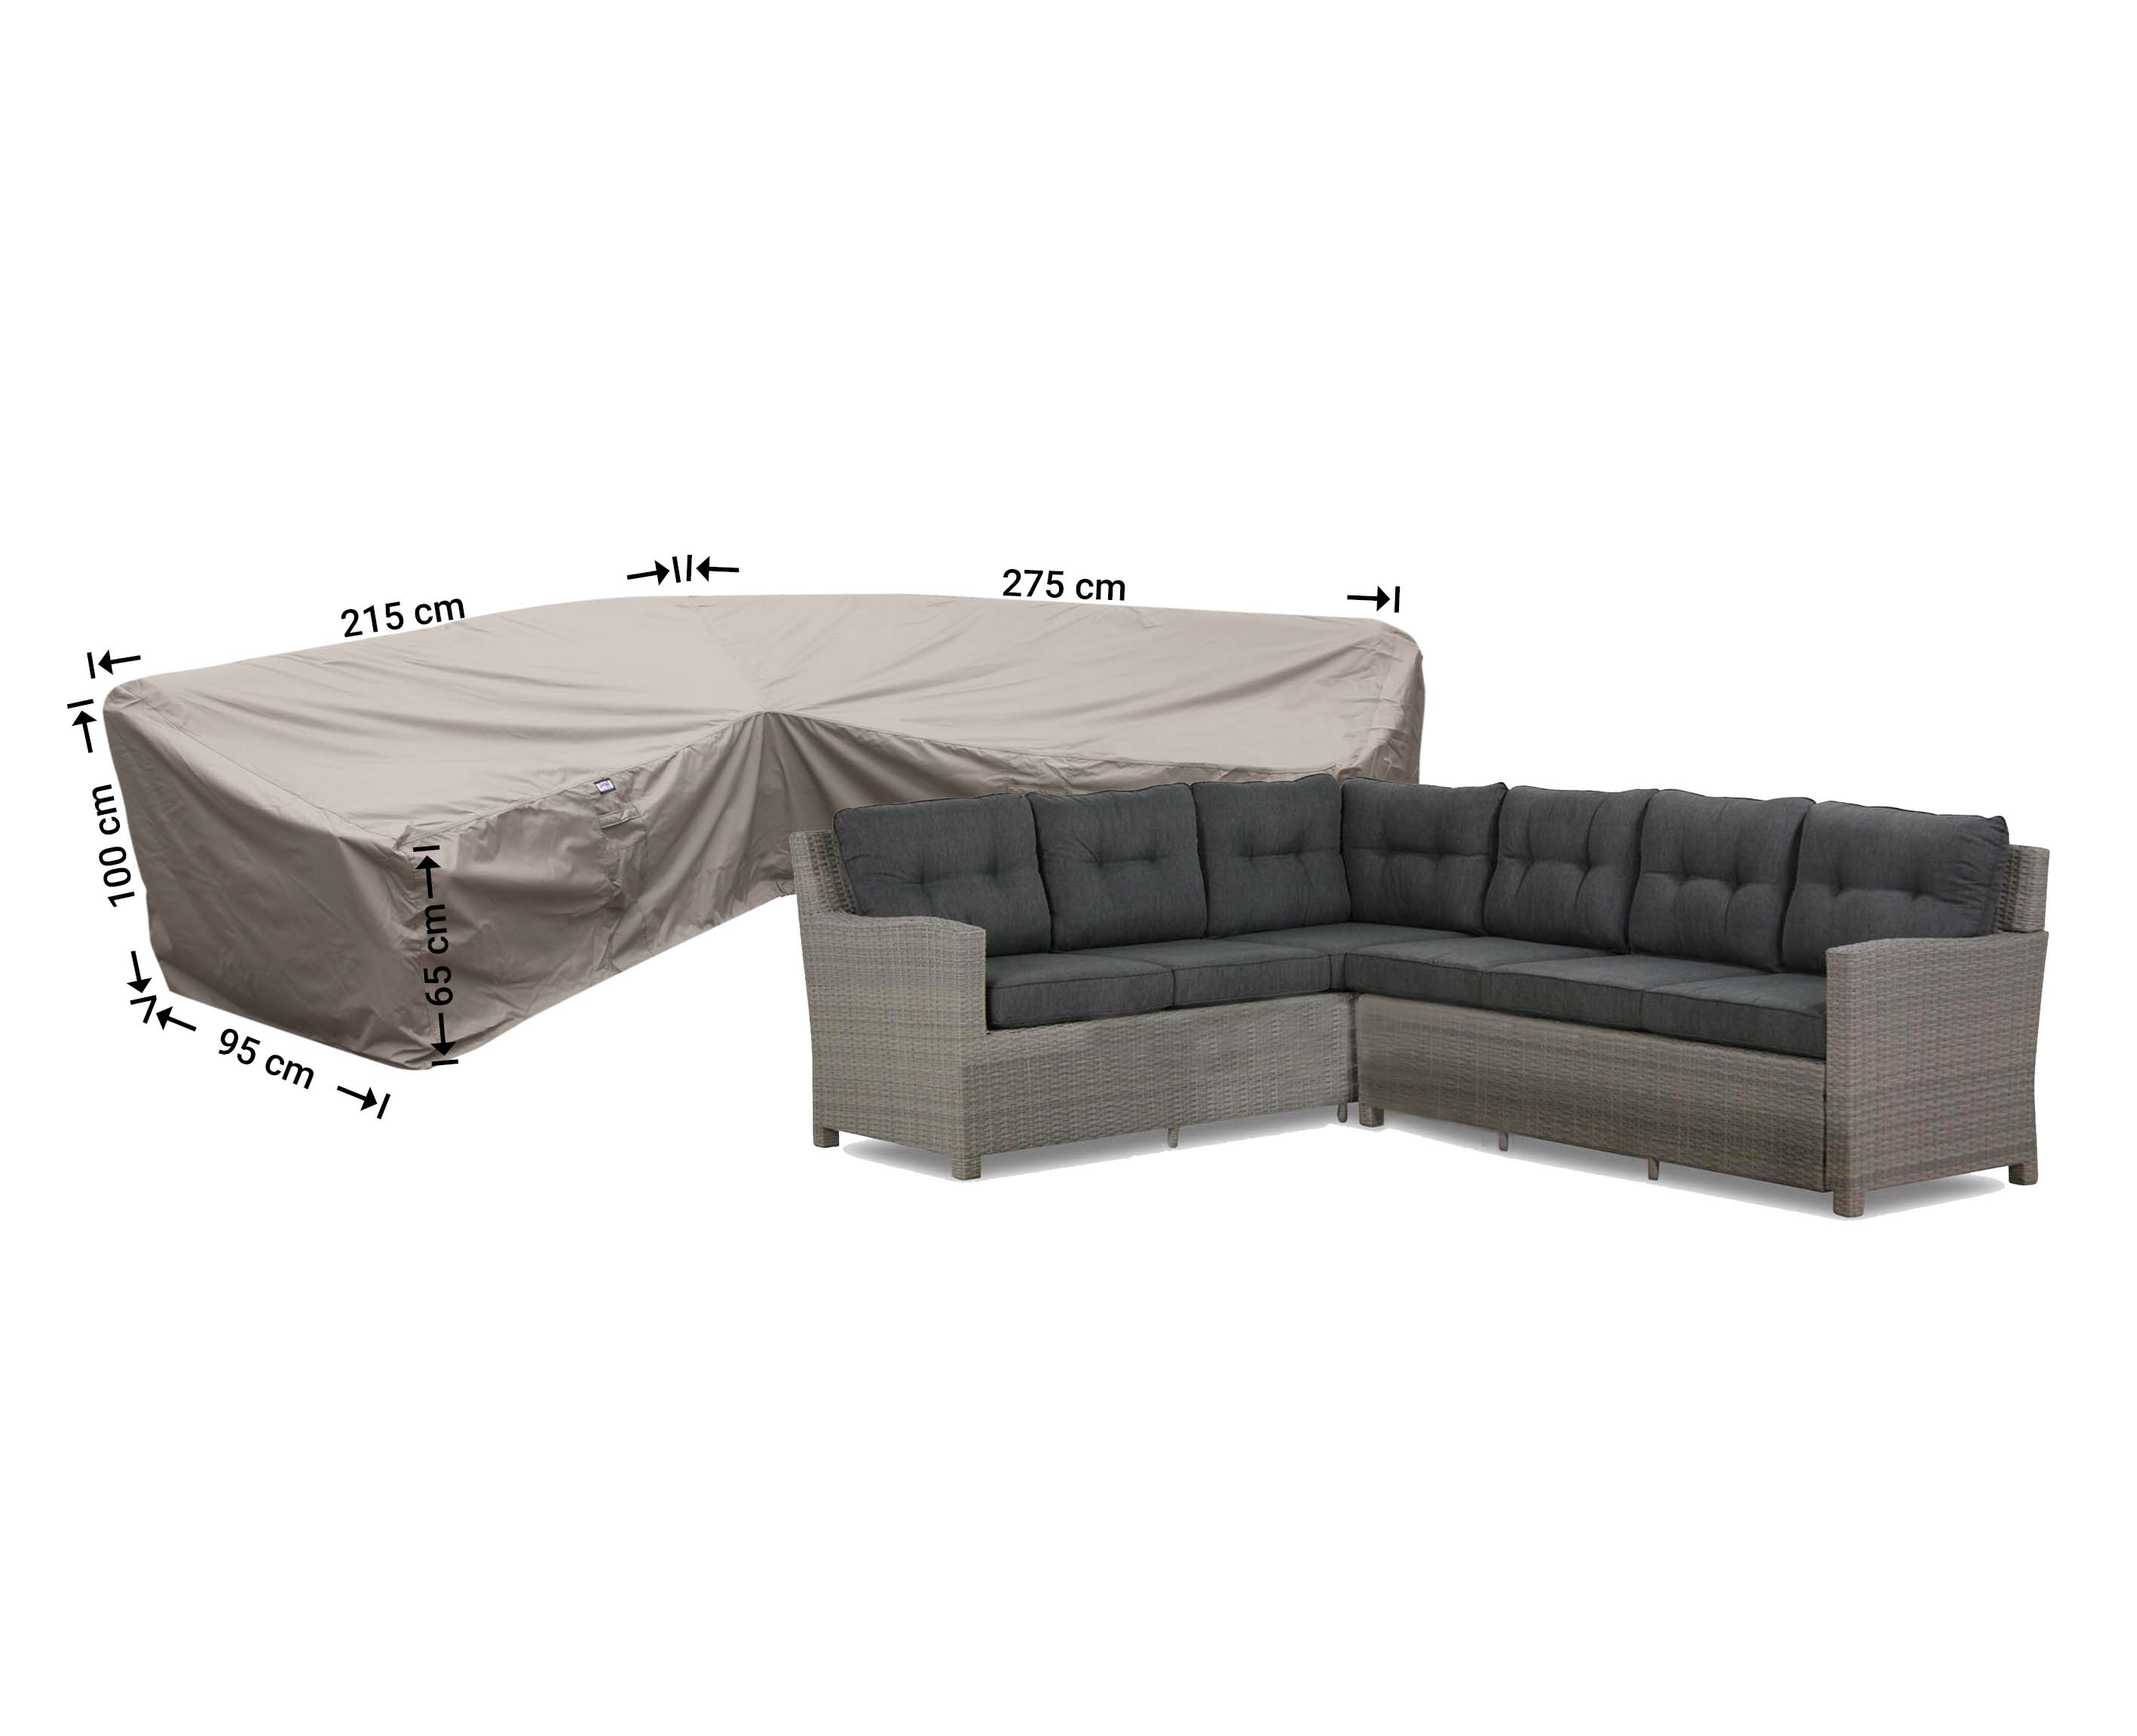 Cover for a lounge dining set 275 x 215 x 95, H: 100 / 65 cm